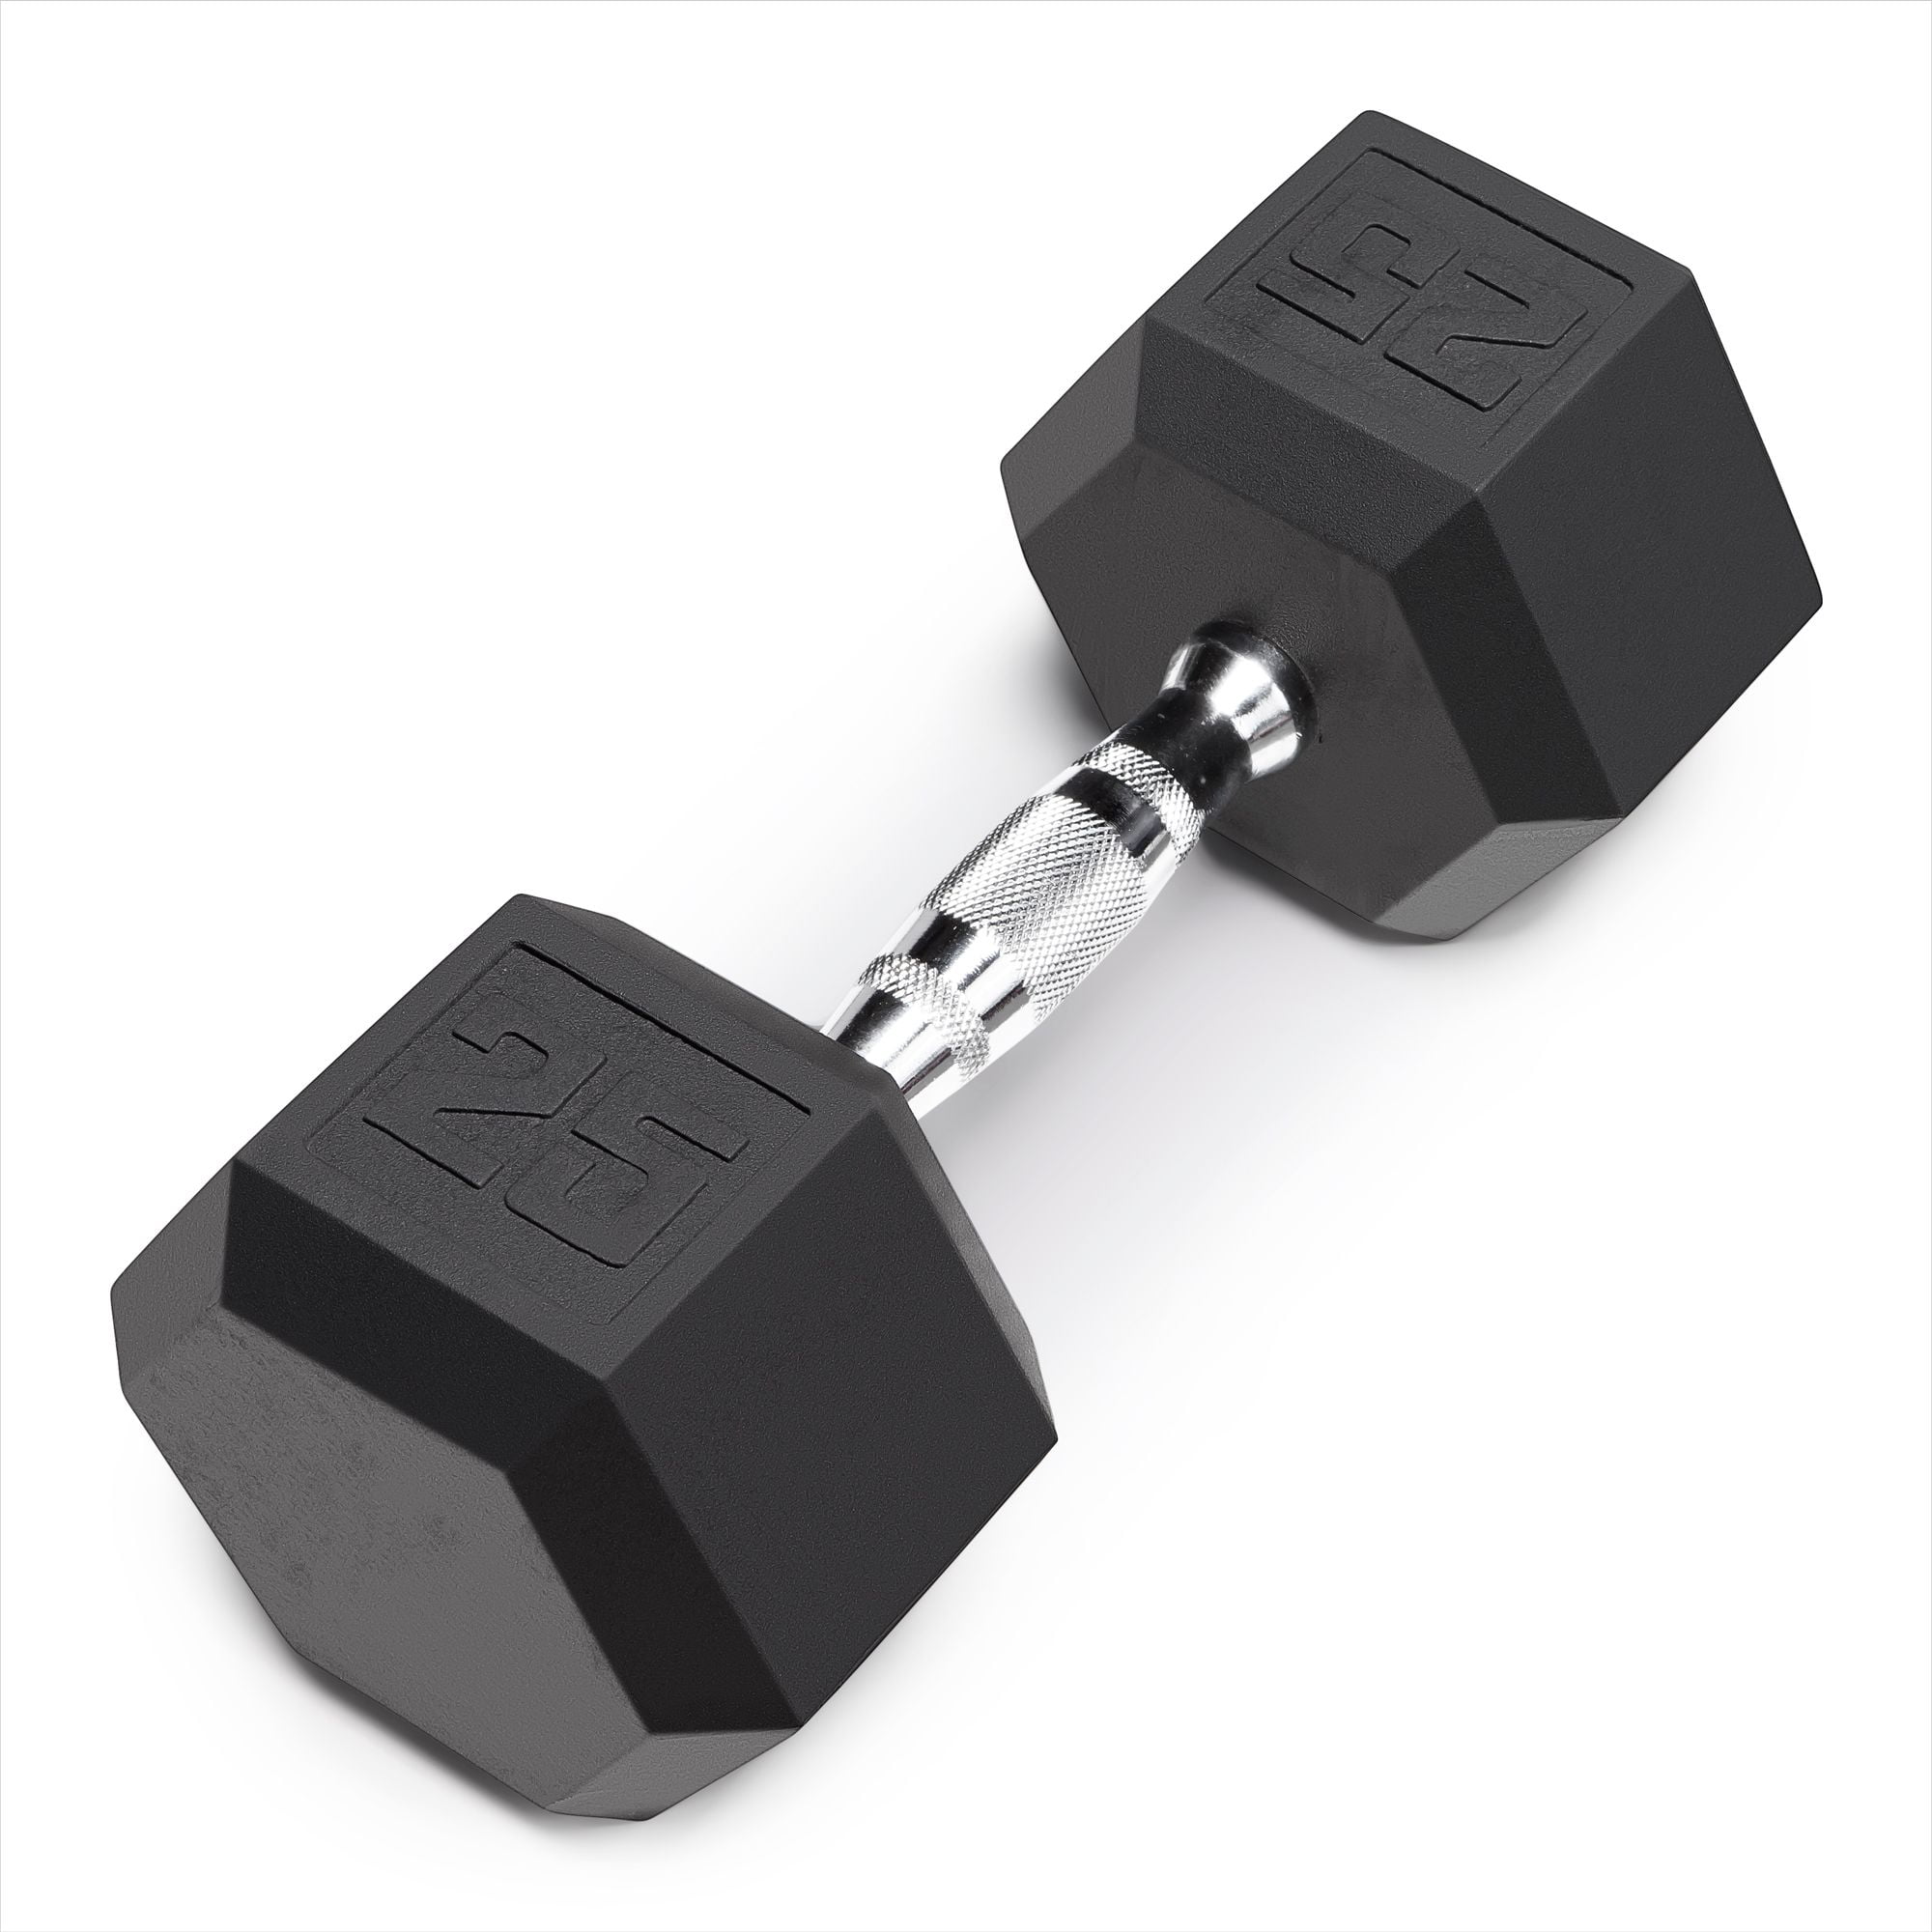 CAP SDR1035 35lbs Coated Hex Dumbbell for sale online 